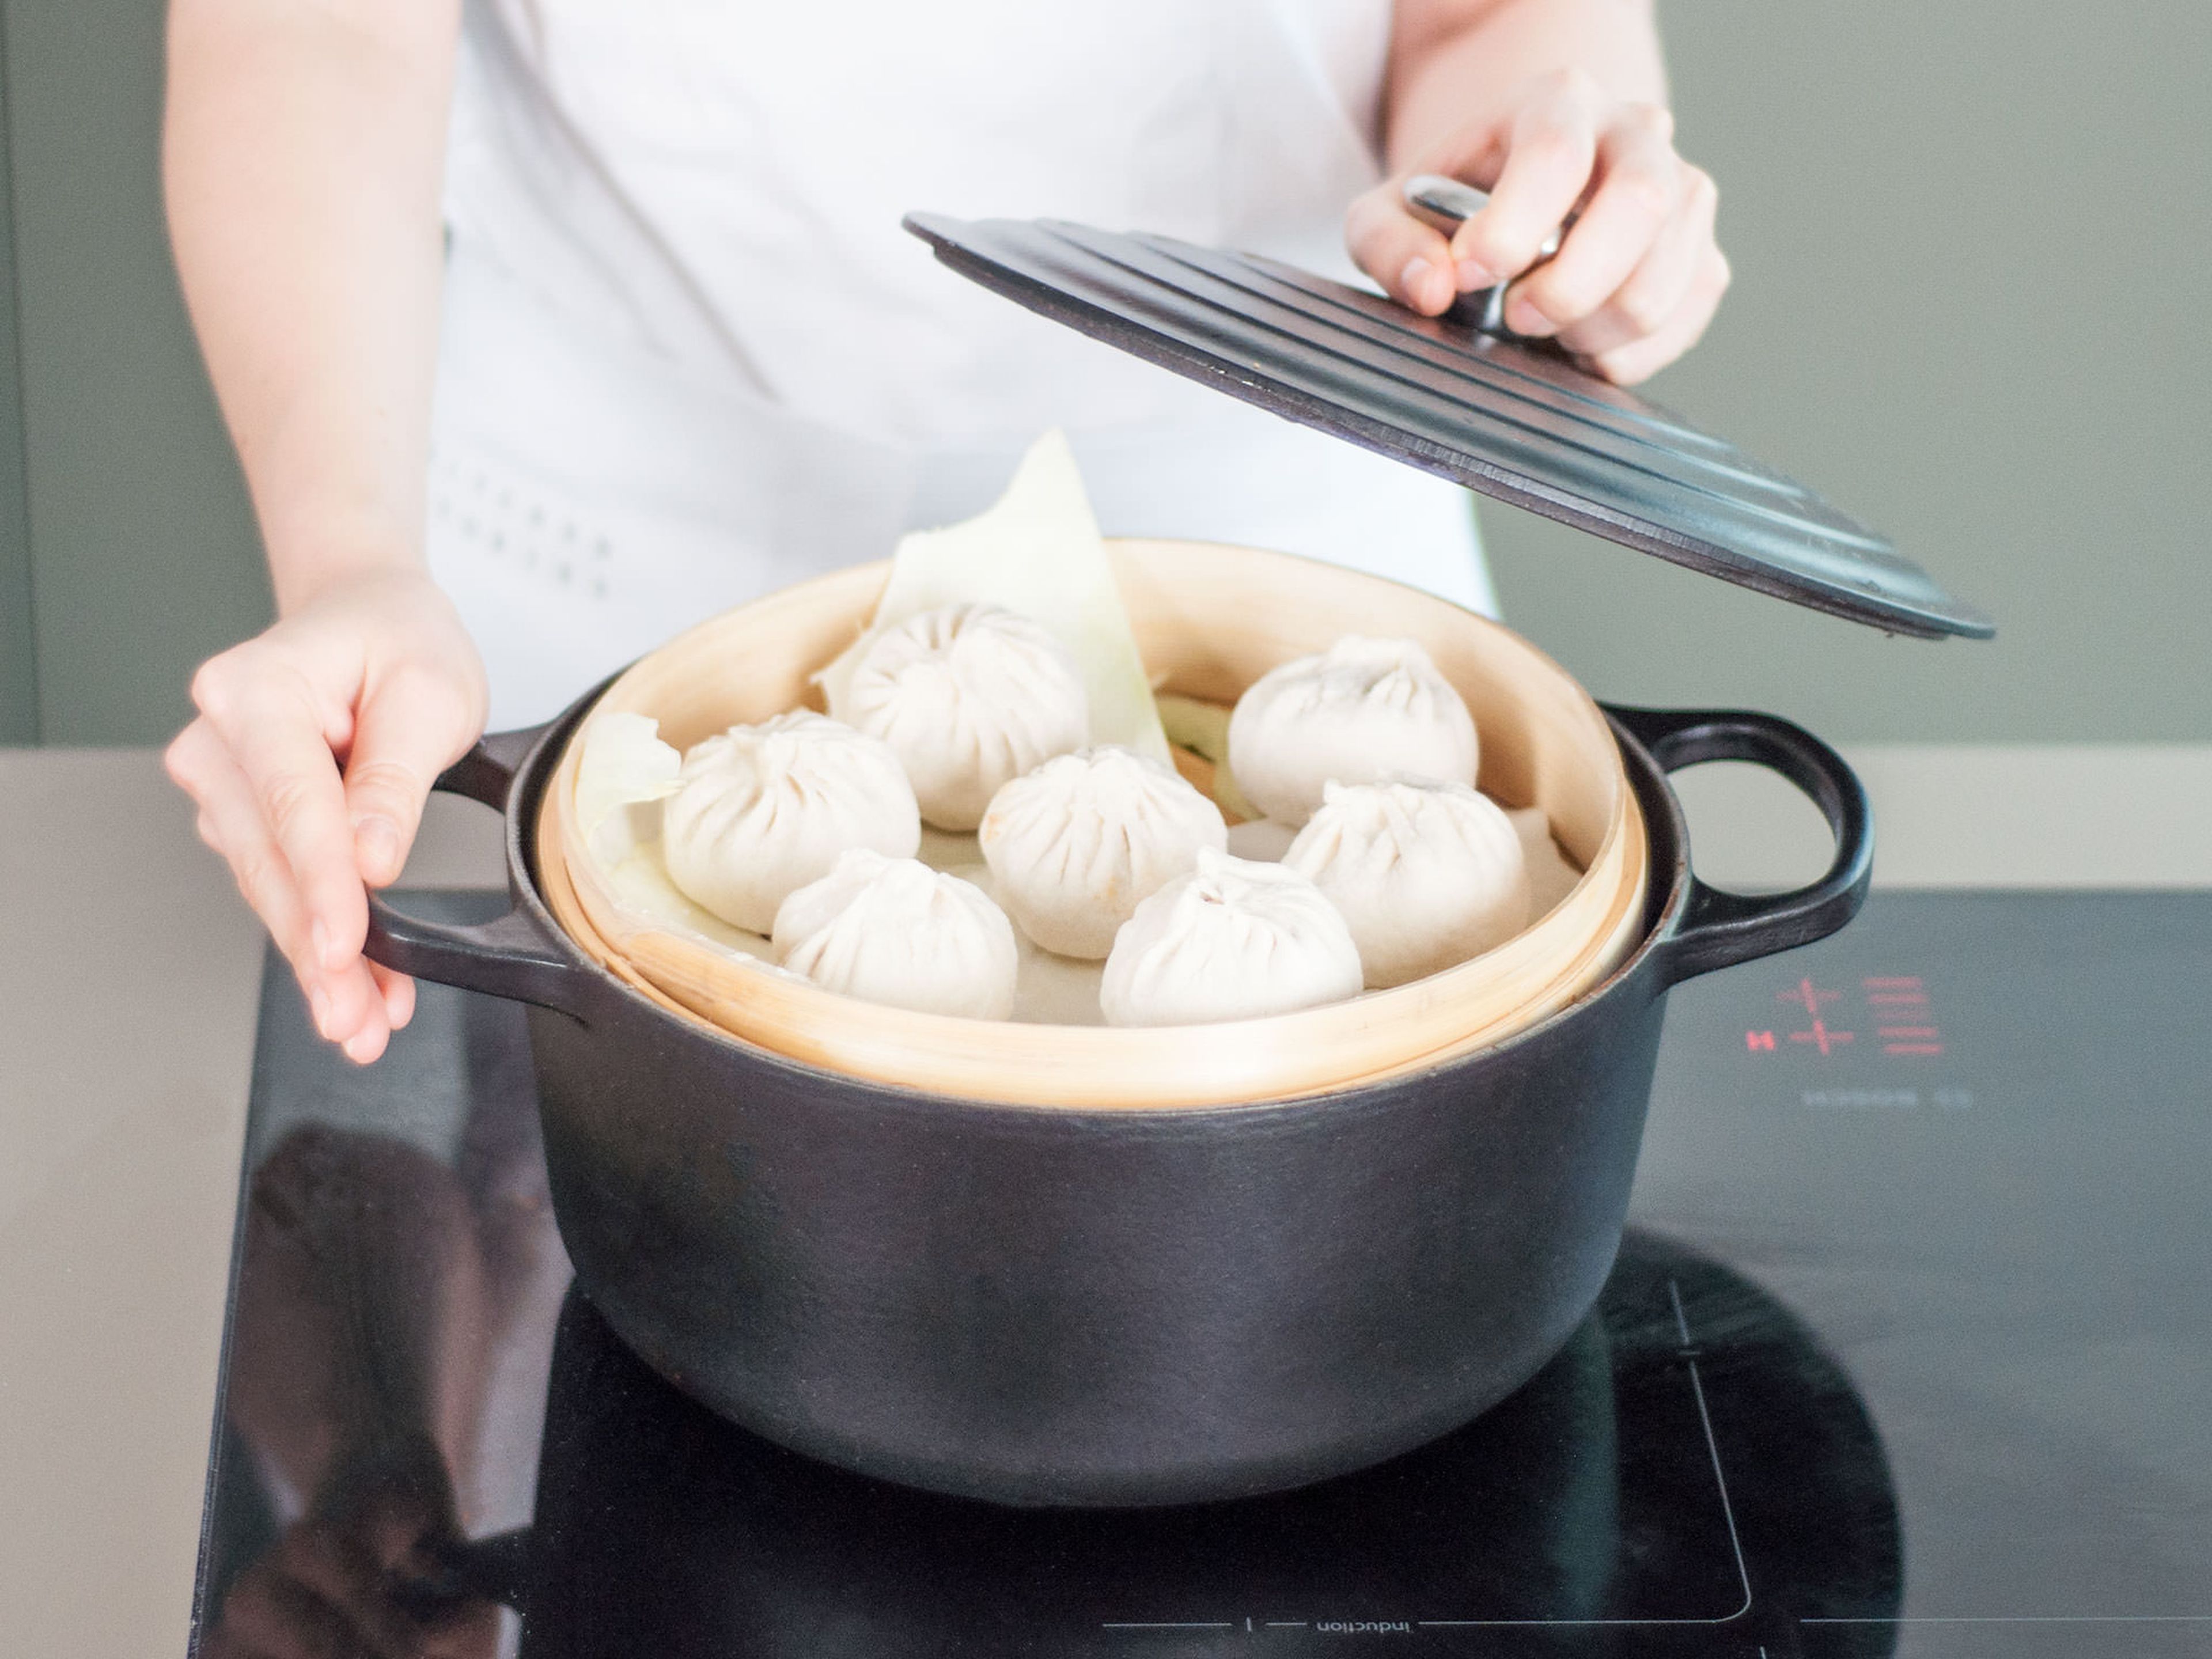 Transfer buns to a steam basket set over boiling water and steam for approx. 15 min.  Allow to cool and enjoy!